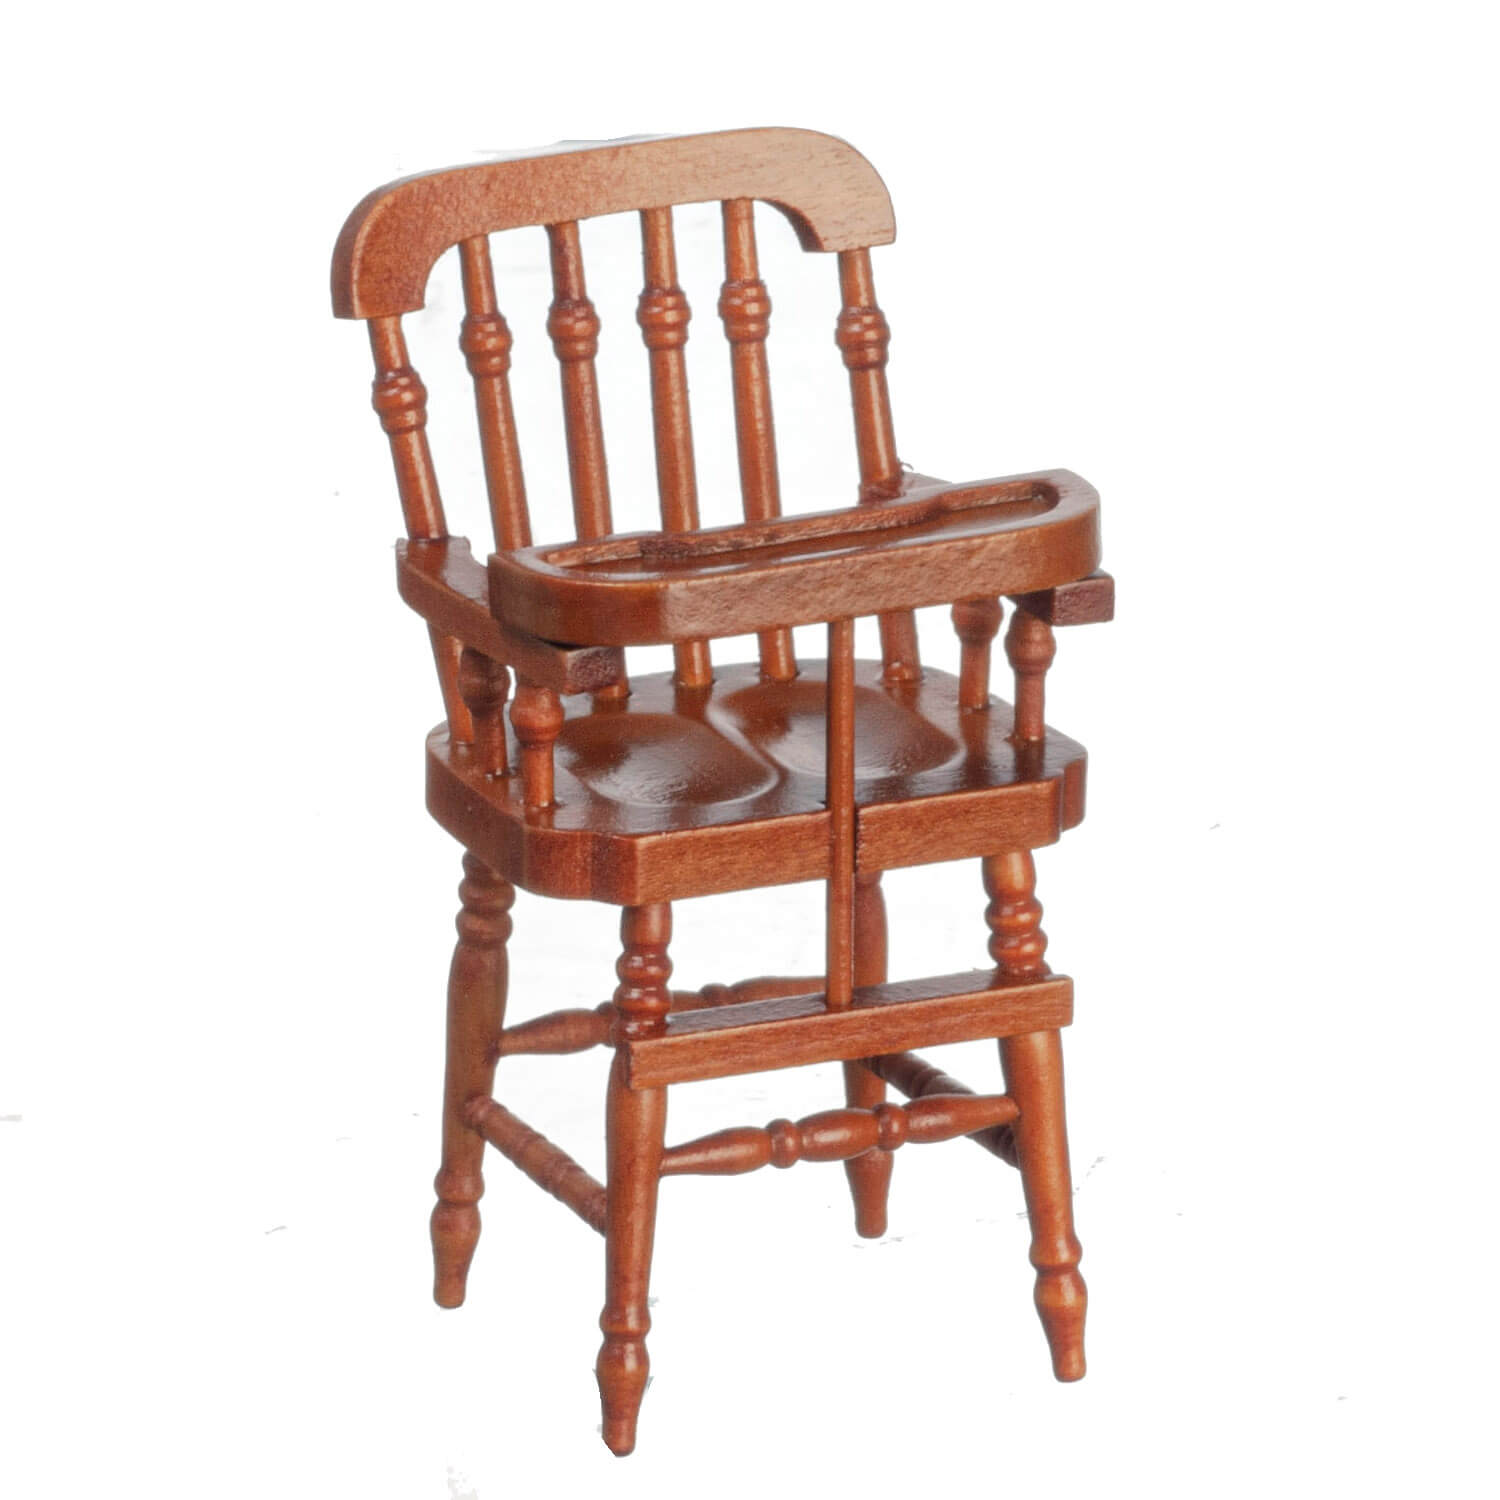 Jenny Lind Reproduction High Chair - Walnut